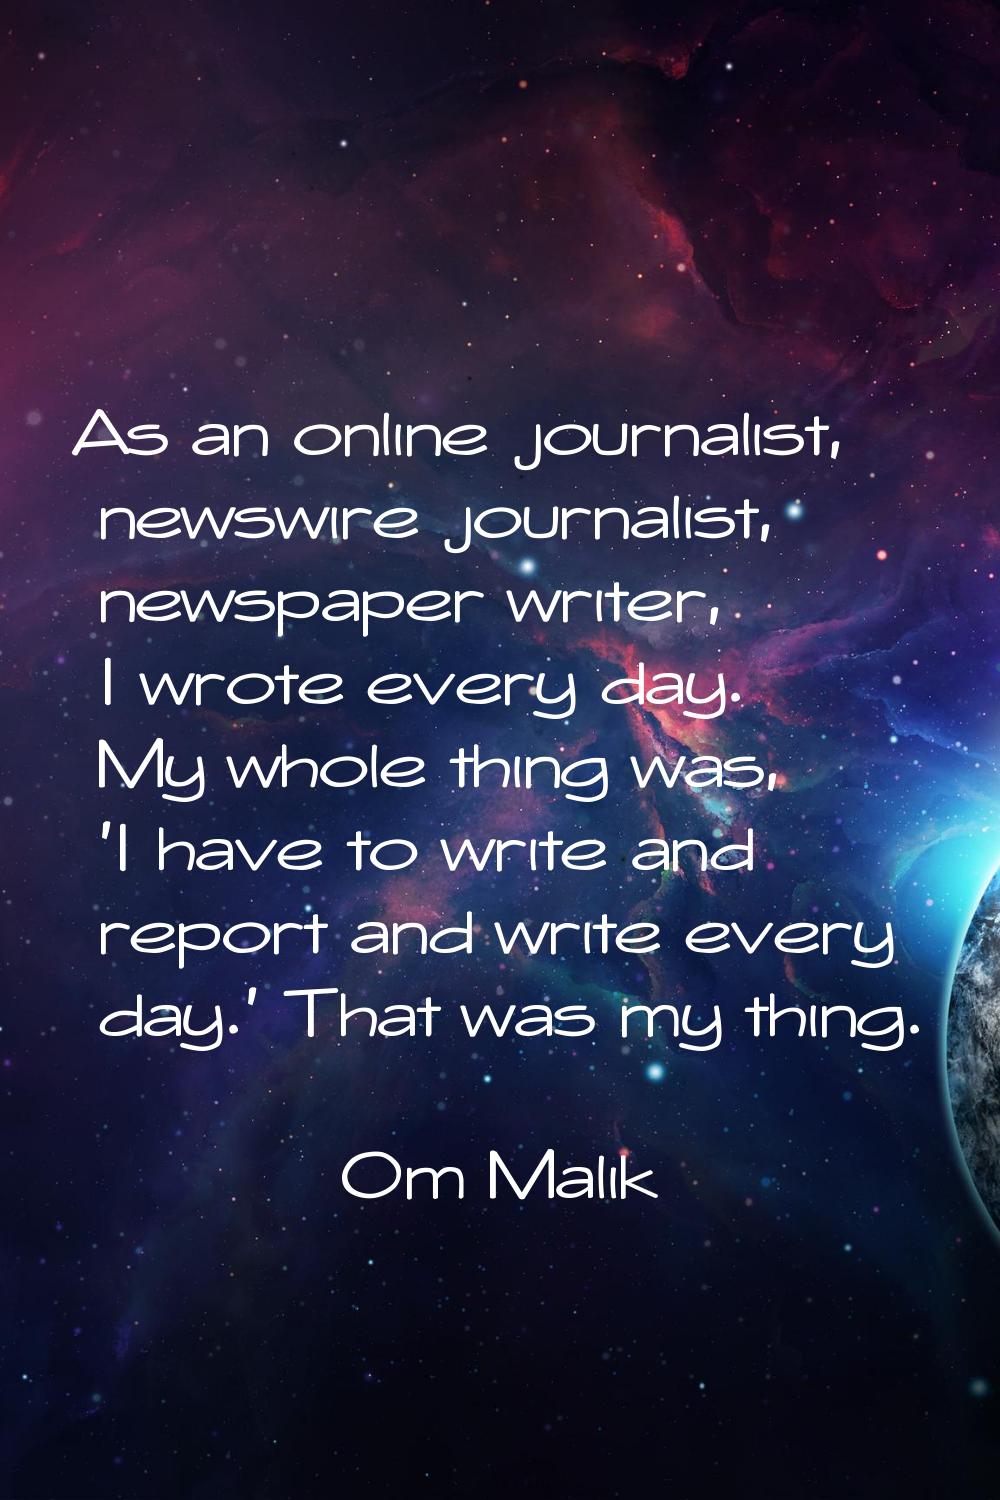 As an online journalist, newswire journalist, newspaper writer, I wrote every day. My whole thing w